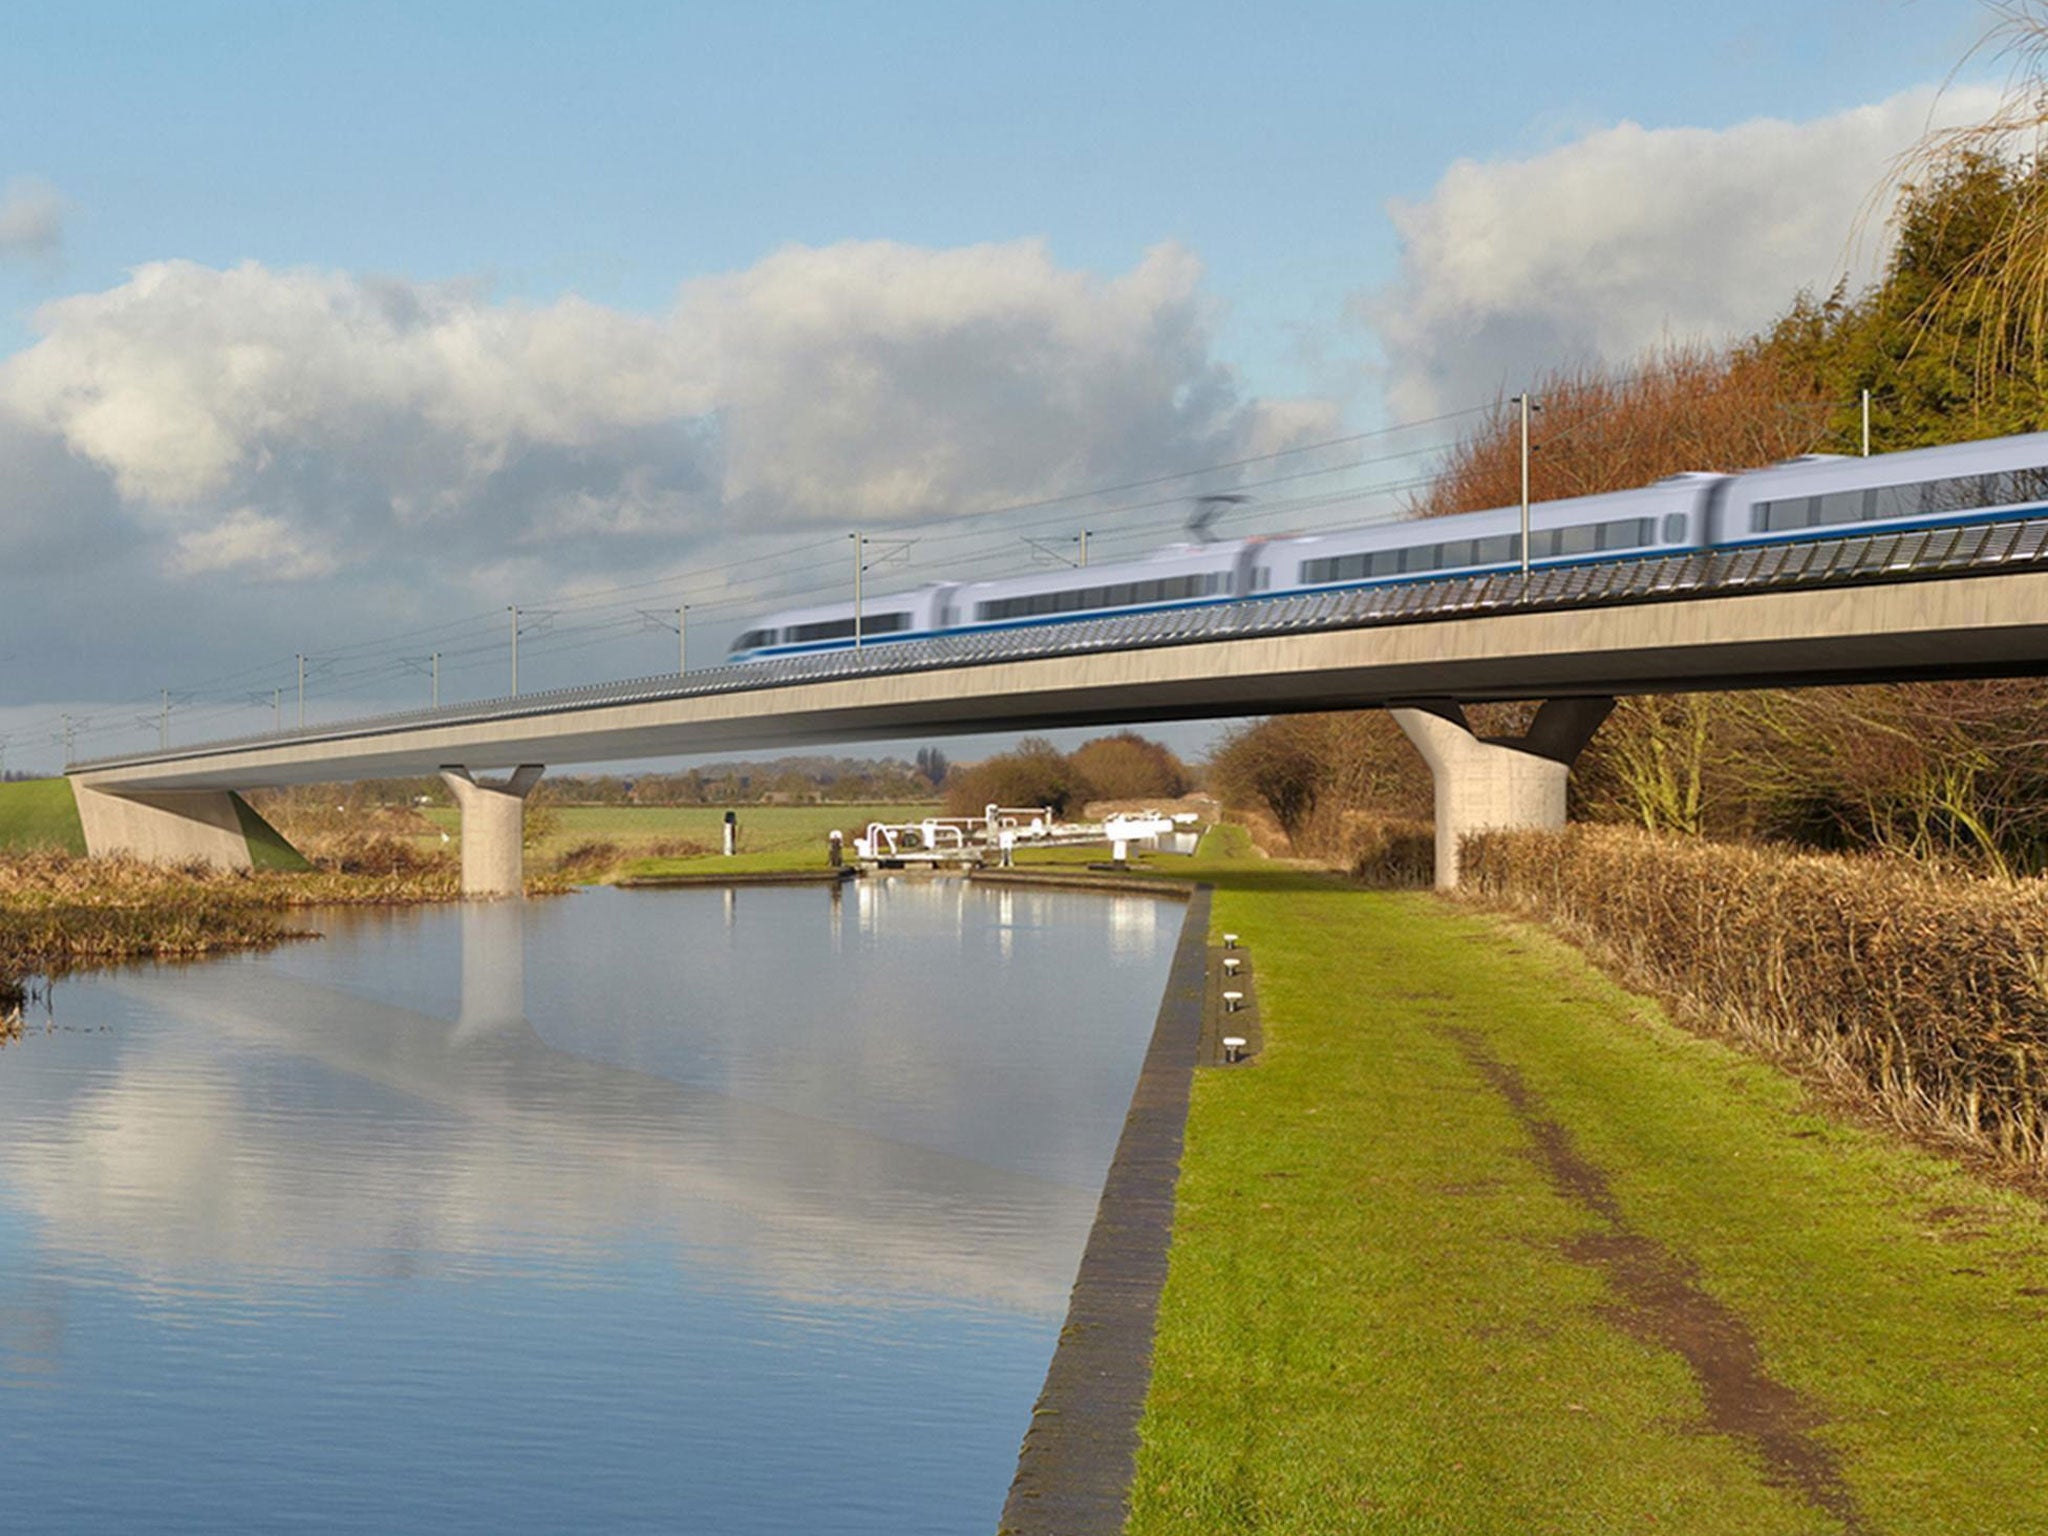 The influential Institute of Directors today became the latest voice to join growing calls for the Government to scrap the high-speed rail project HS2